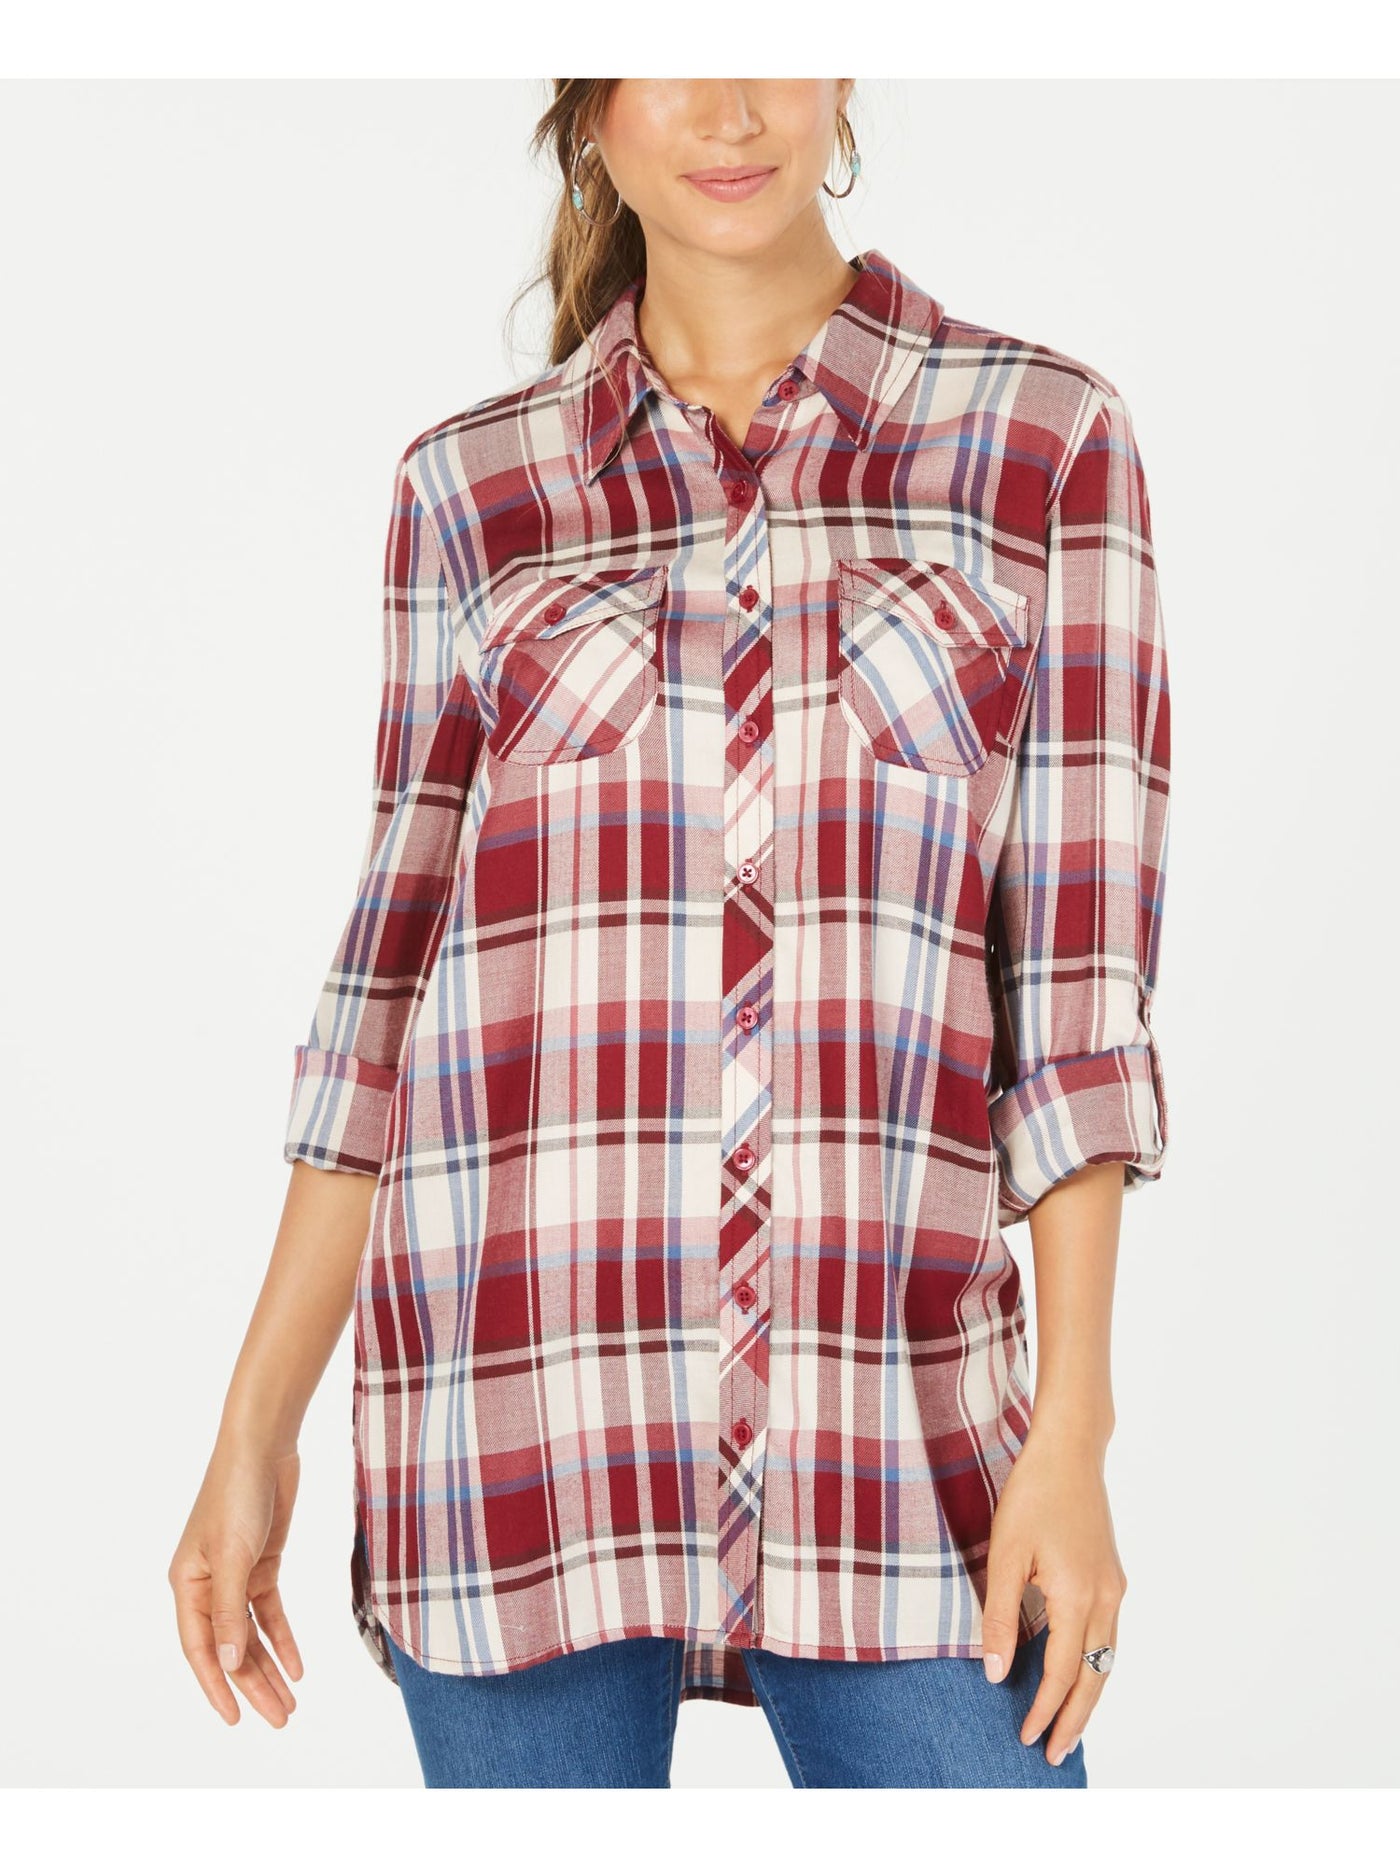 STYLE & COMPANY Womens Cuffed Collared Button Up Top